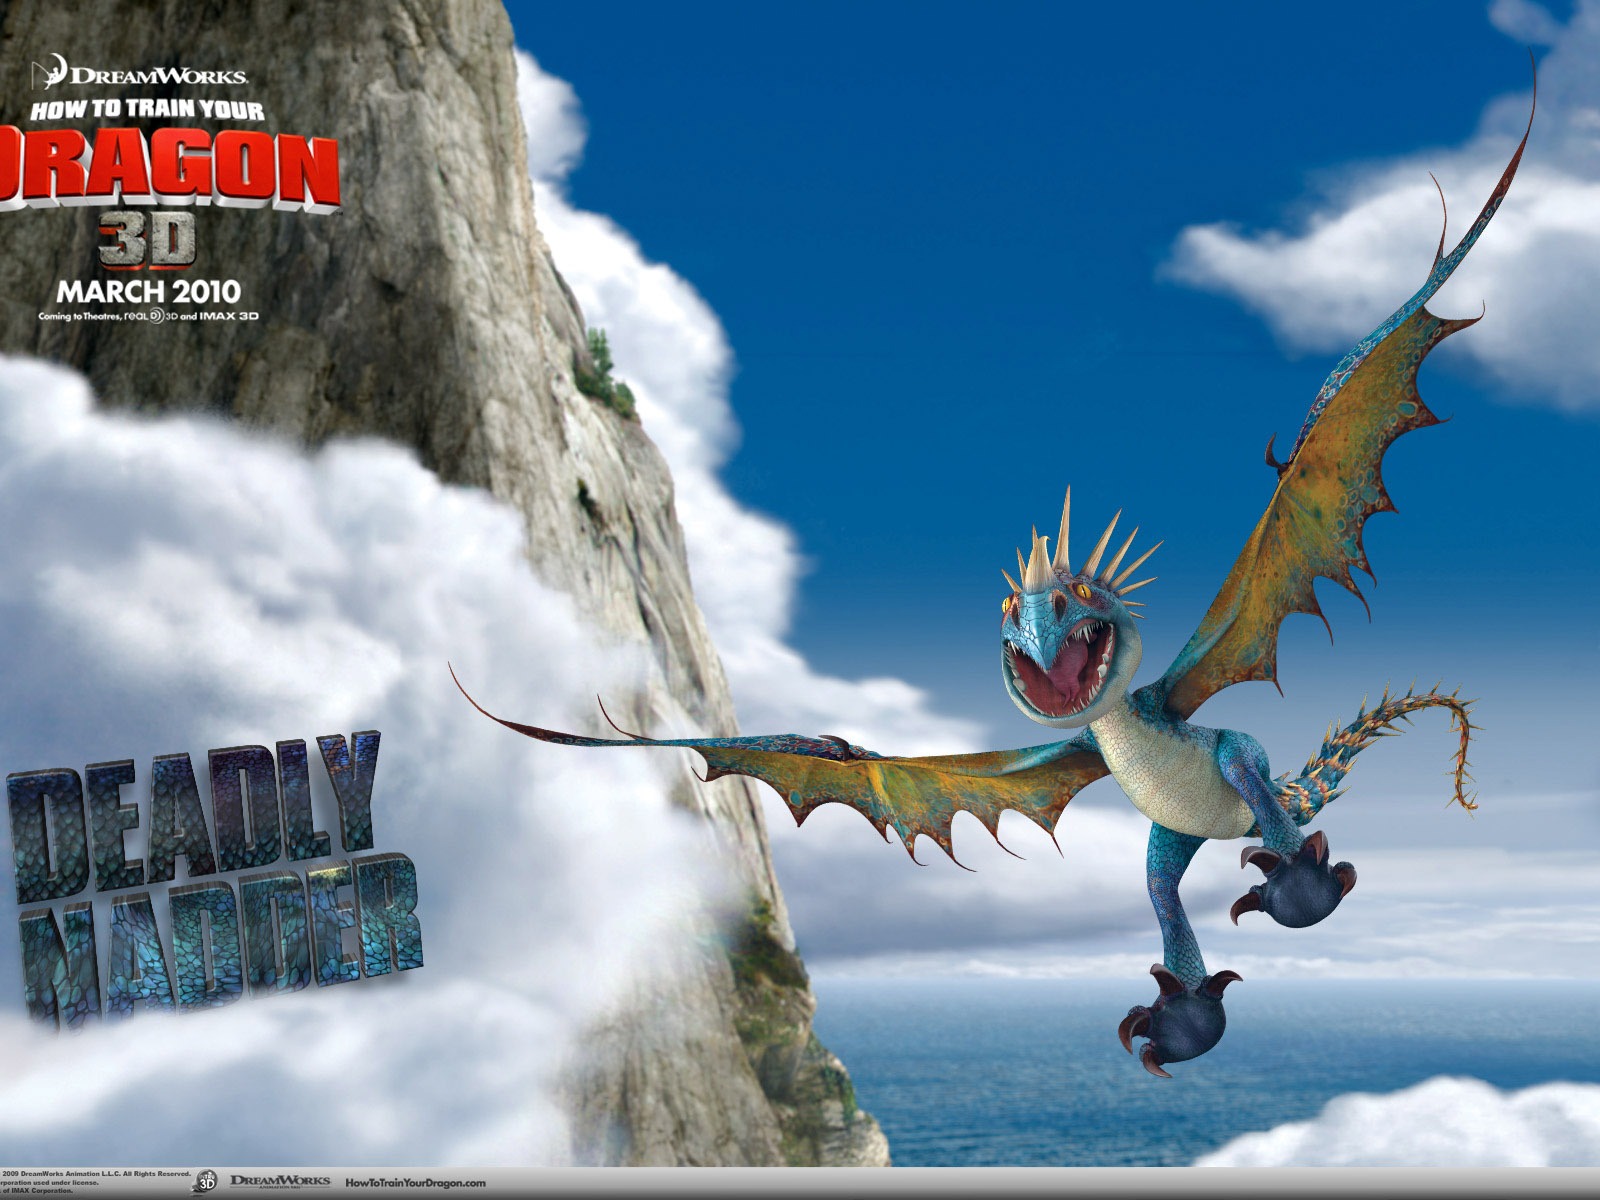 How to Train Your Dragon 驯龙高手 高清壁纸8 - 1600x1200